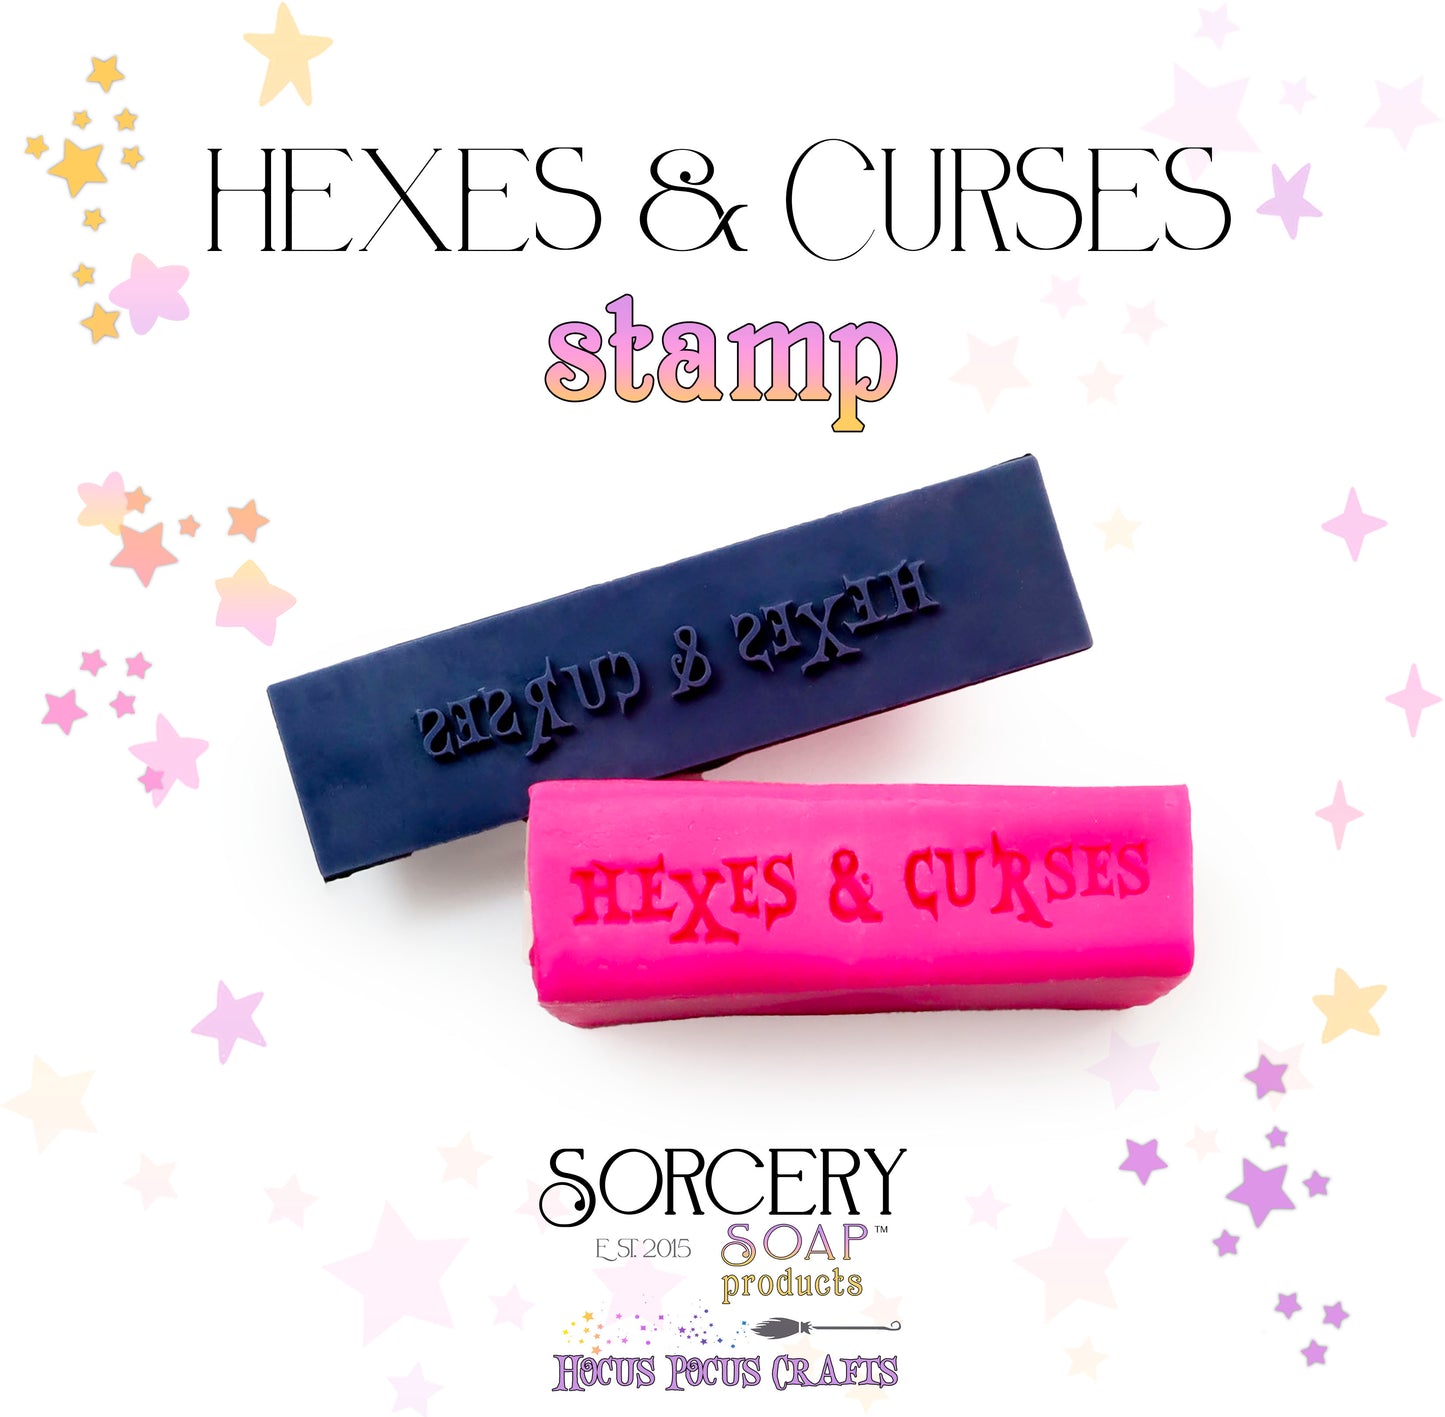 Hexes and Curses Stamp